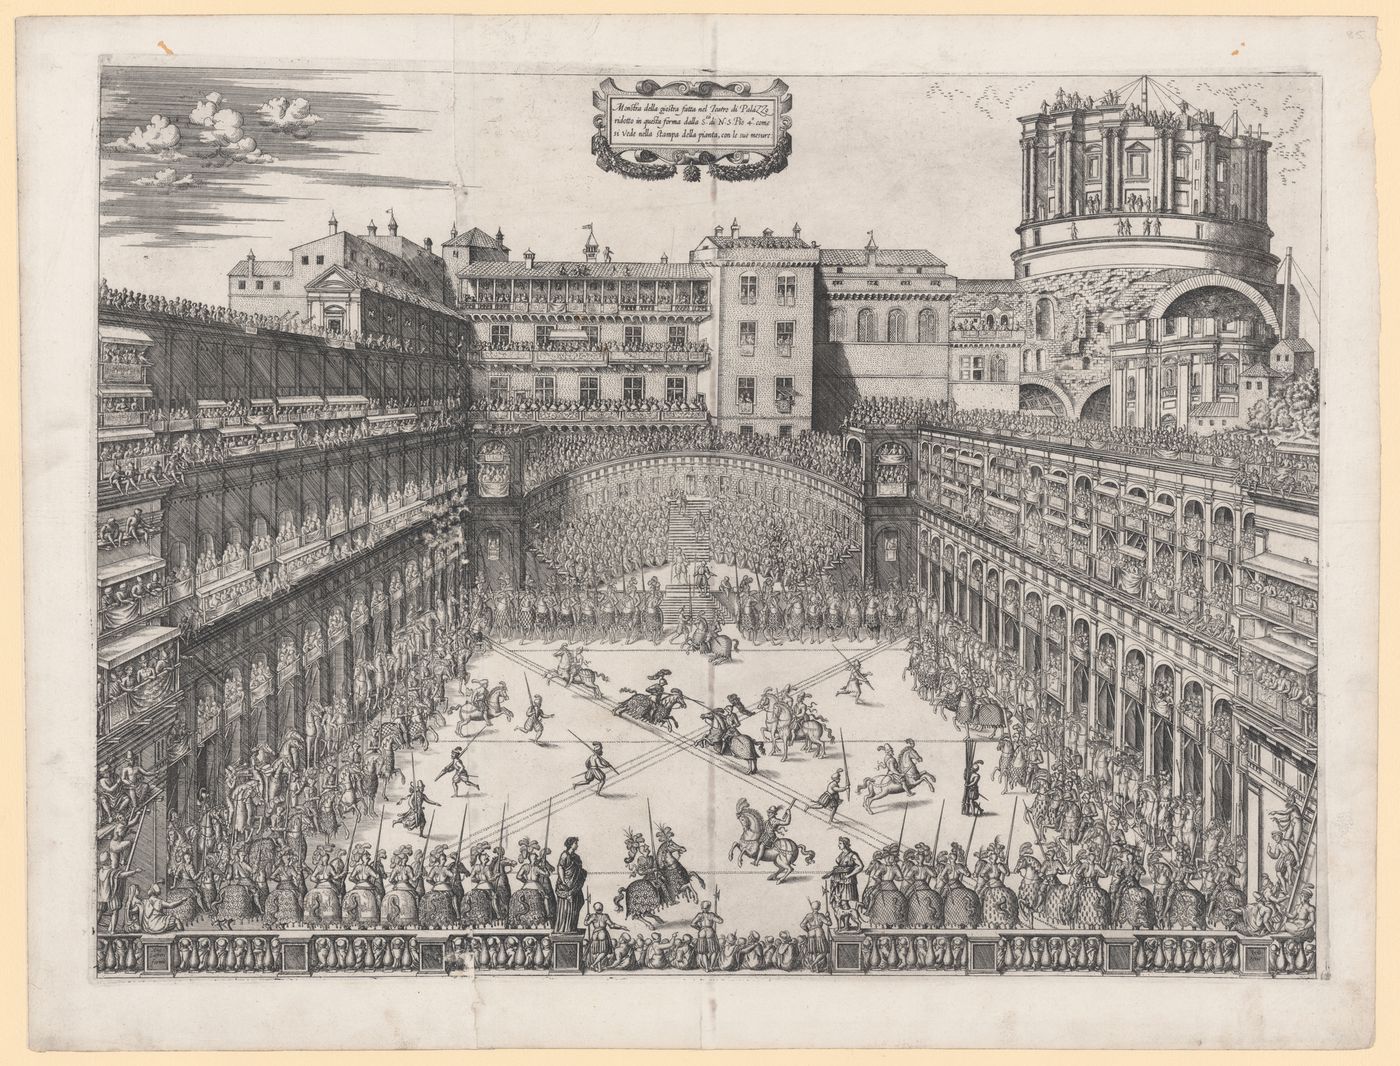 Perspective of a tournament held in the Cortile di Belvedere, Vatican Palace, Rome